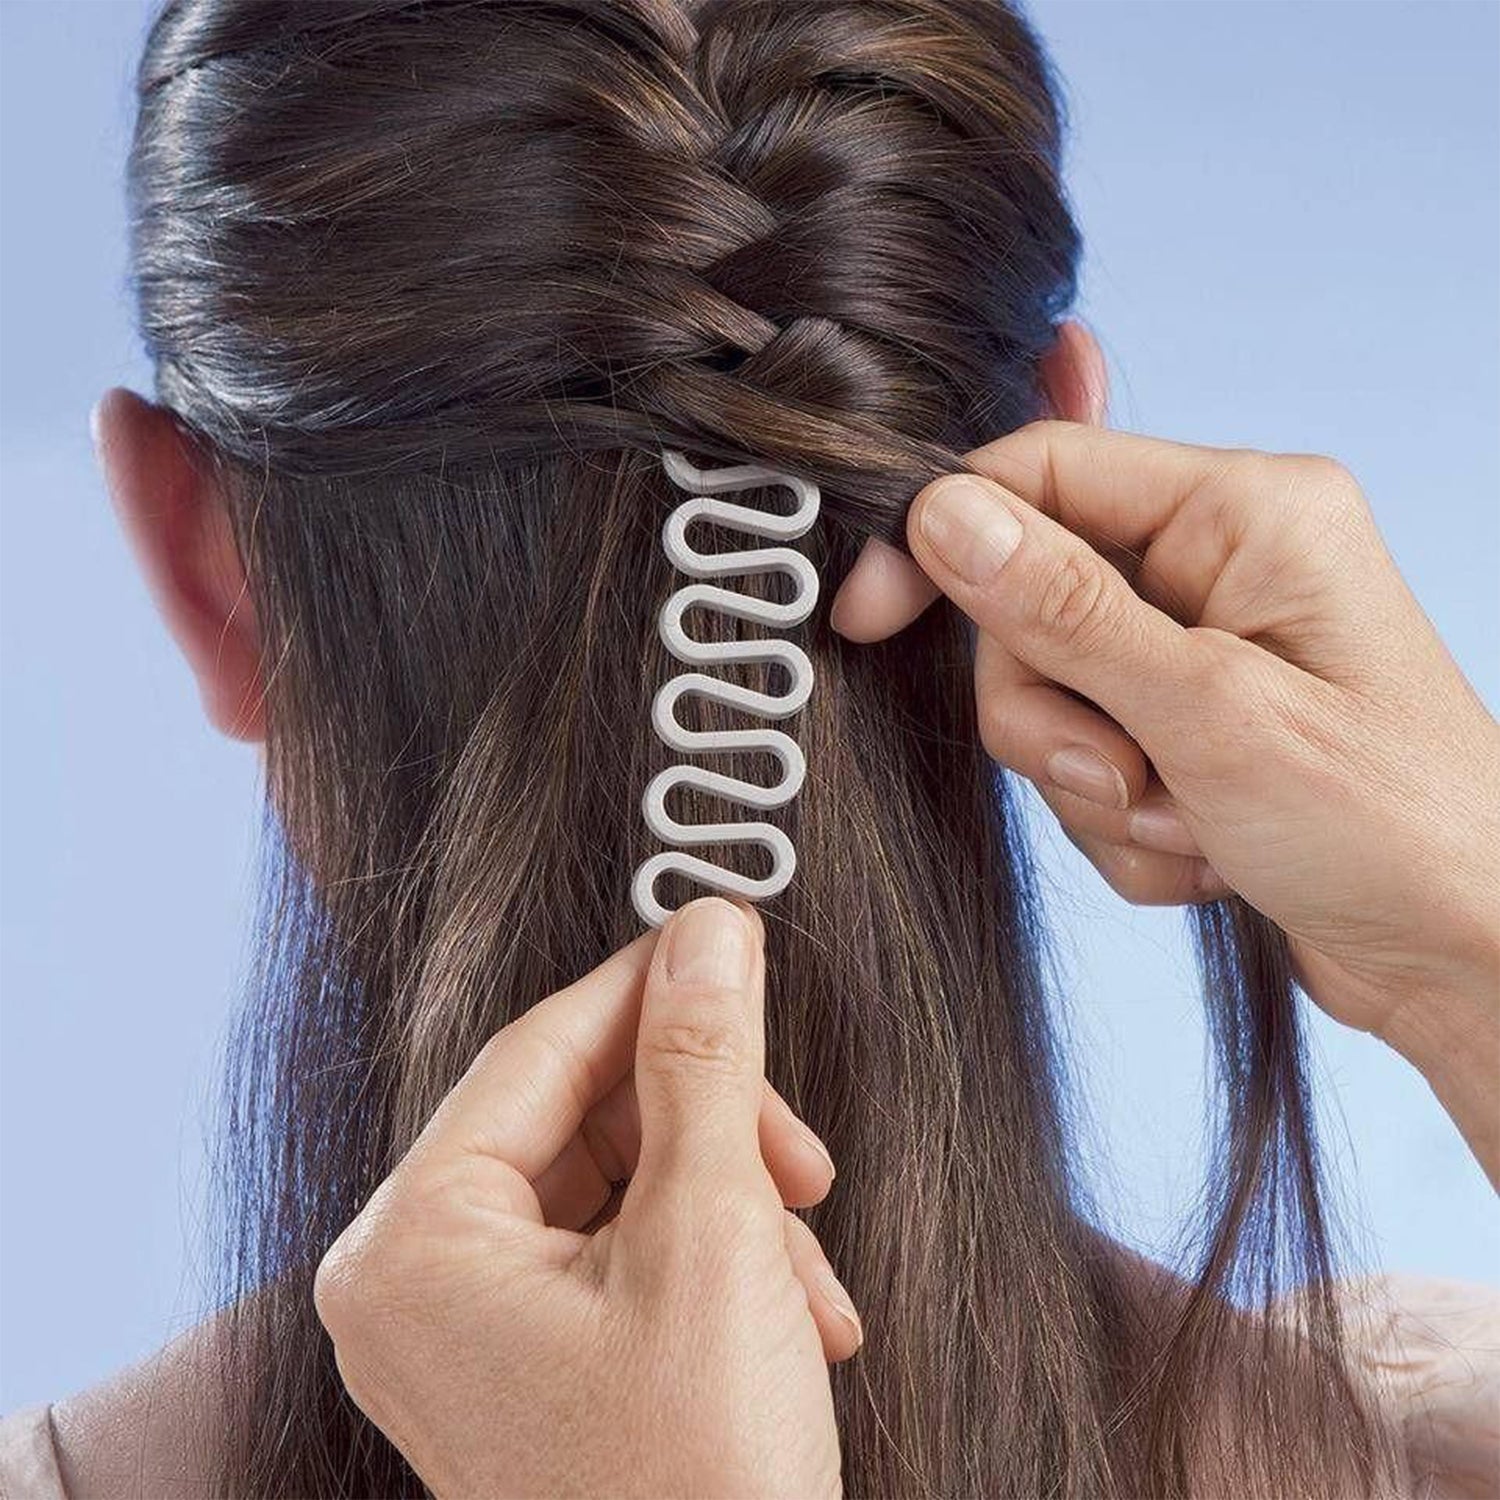 6147 Fishbone Bun Maker widely used by womens for making their hair looks like a fish tail and all and it used in many kinds of places like household, parlours etc - DeoDap